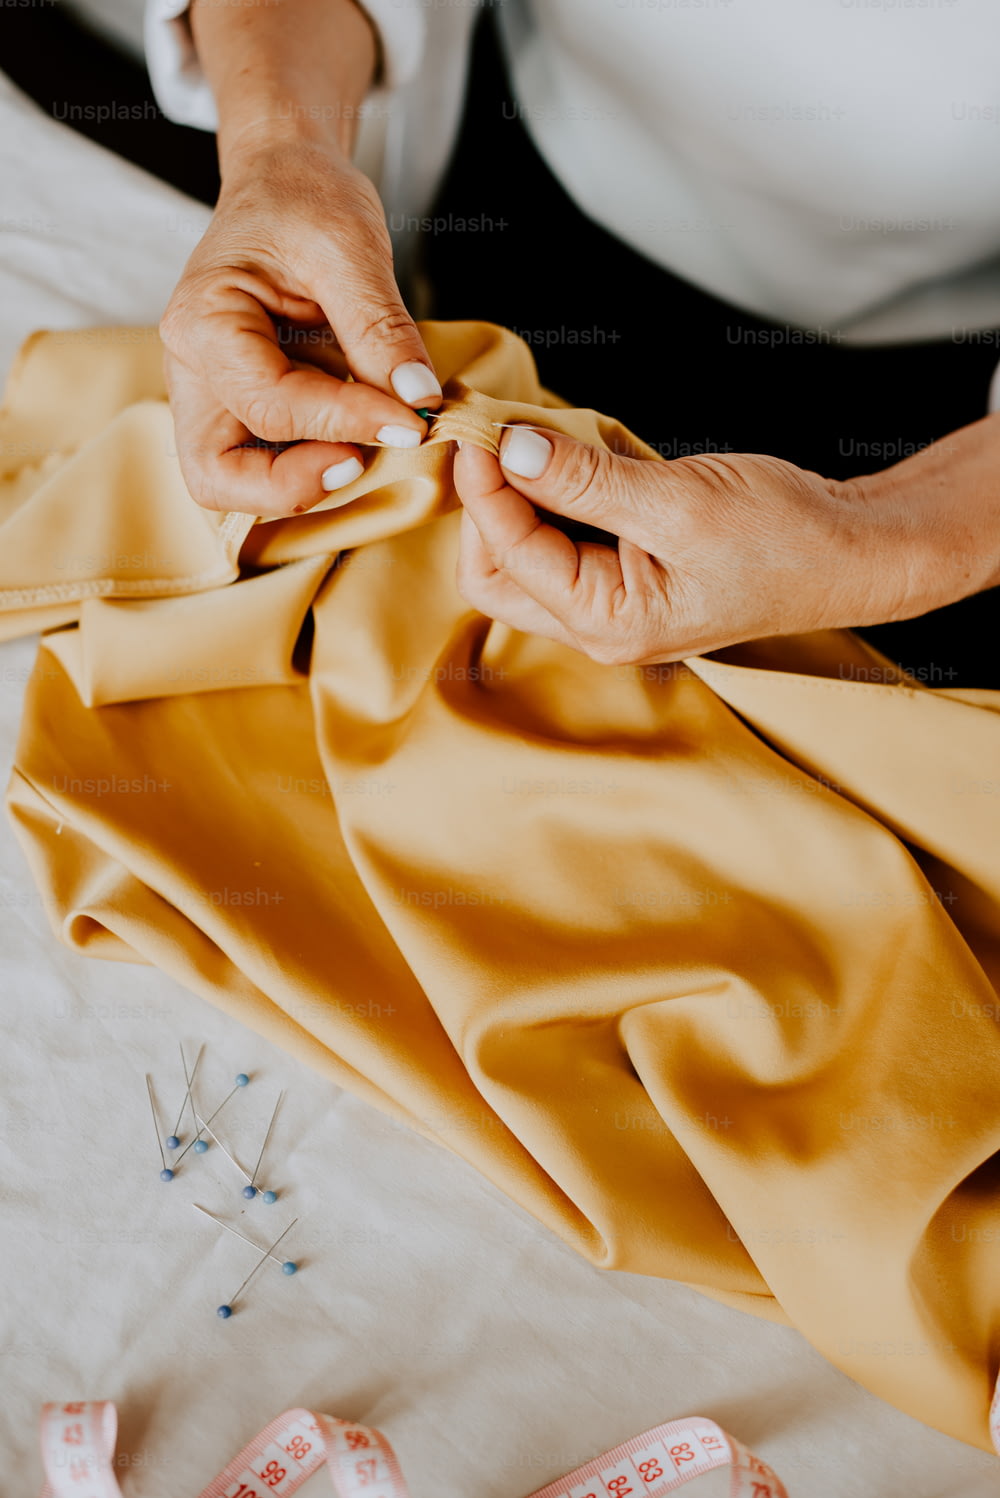 a woman is sewing a yellow cloth on a sewing machine